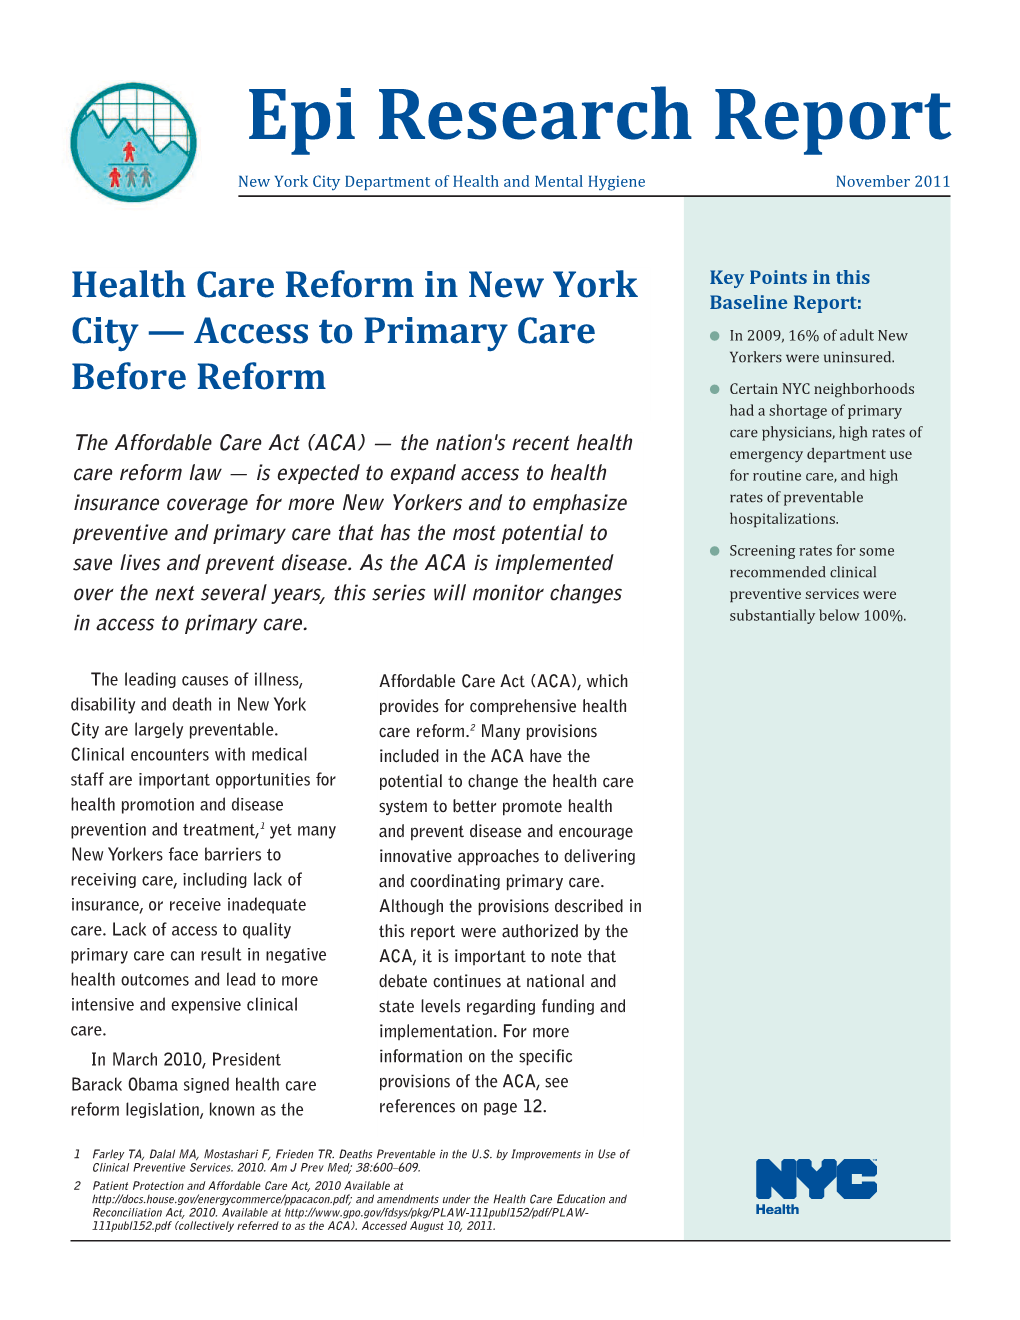 Health Care Reform in New York City—Access to Primary